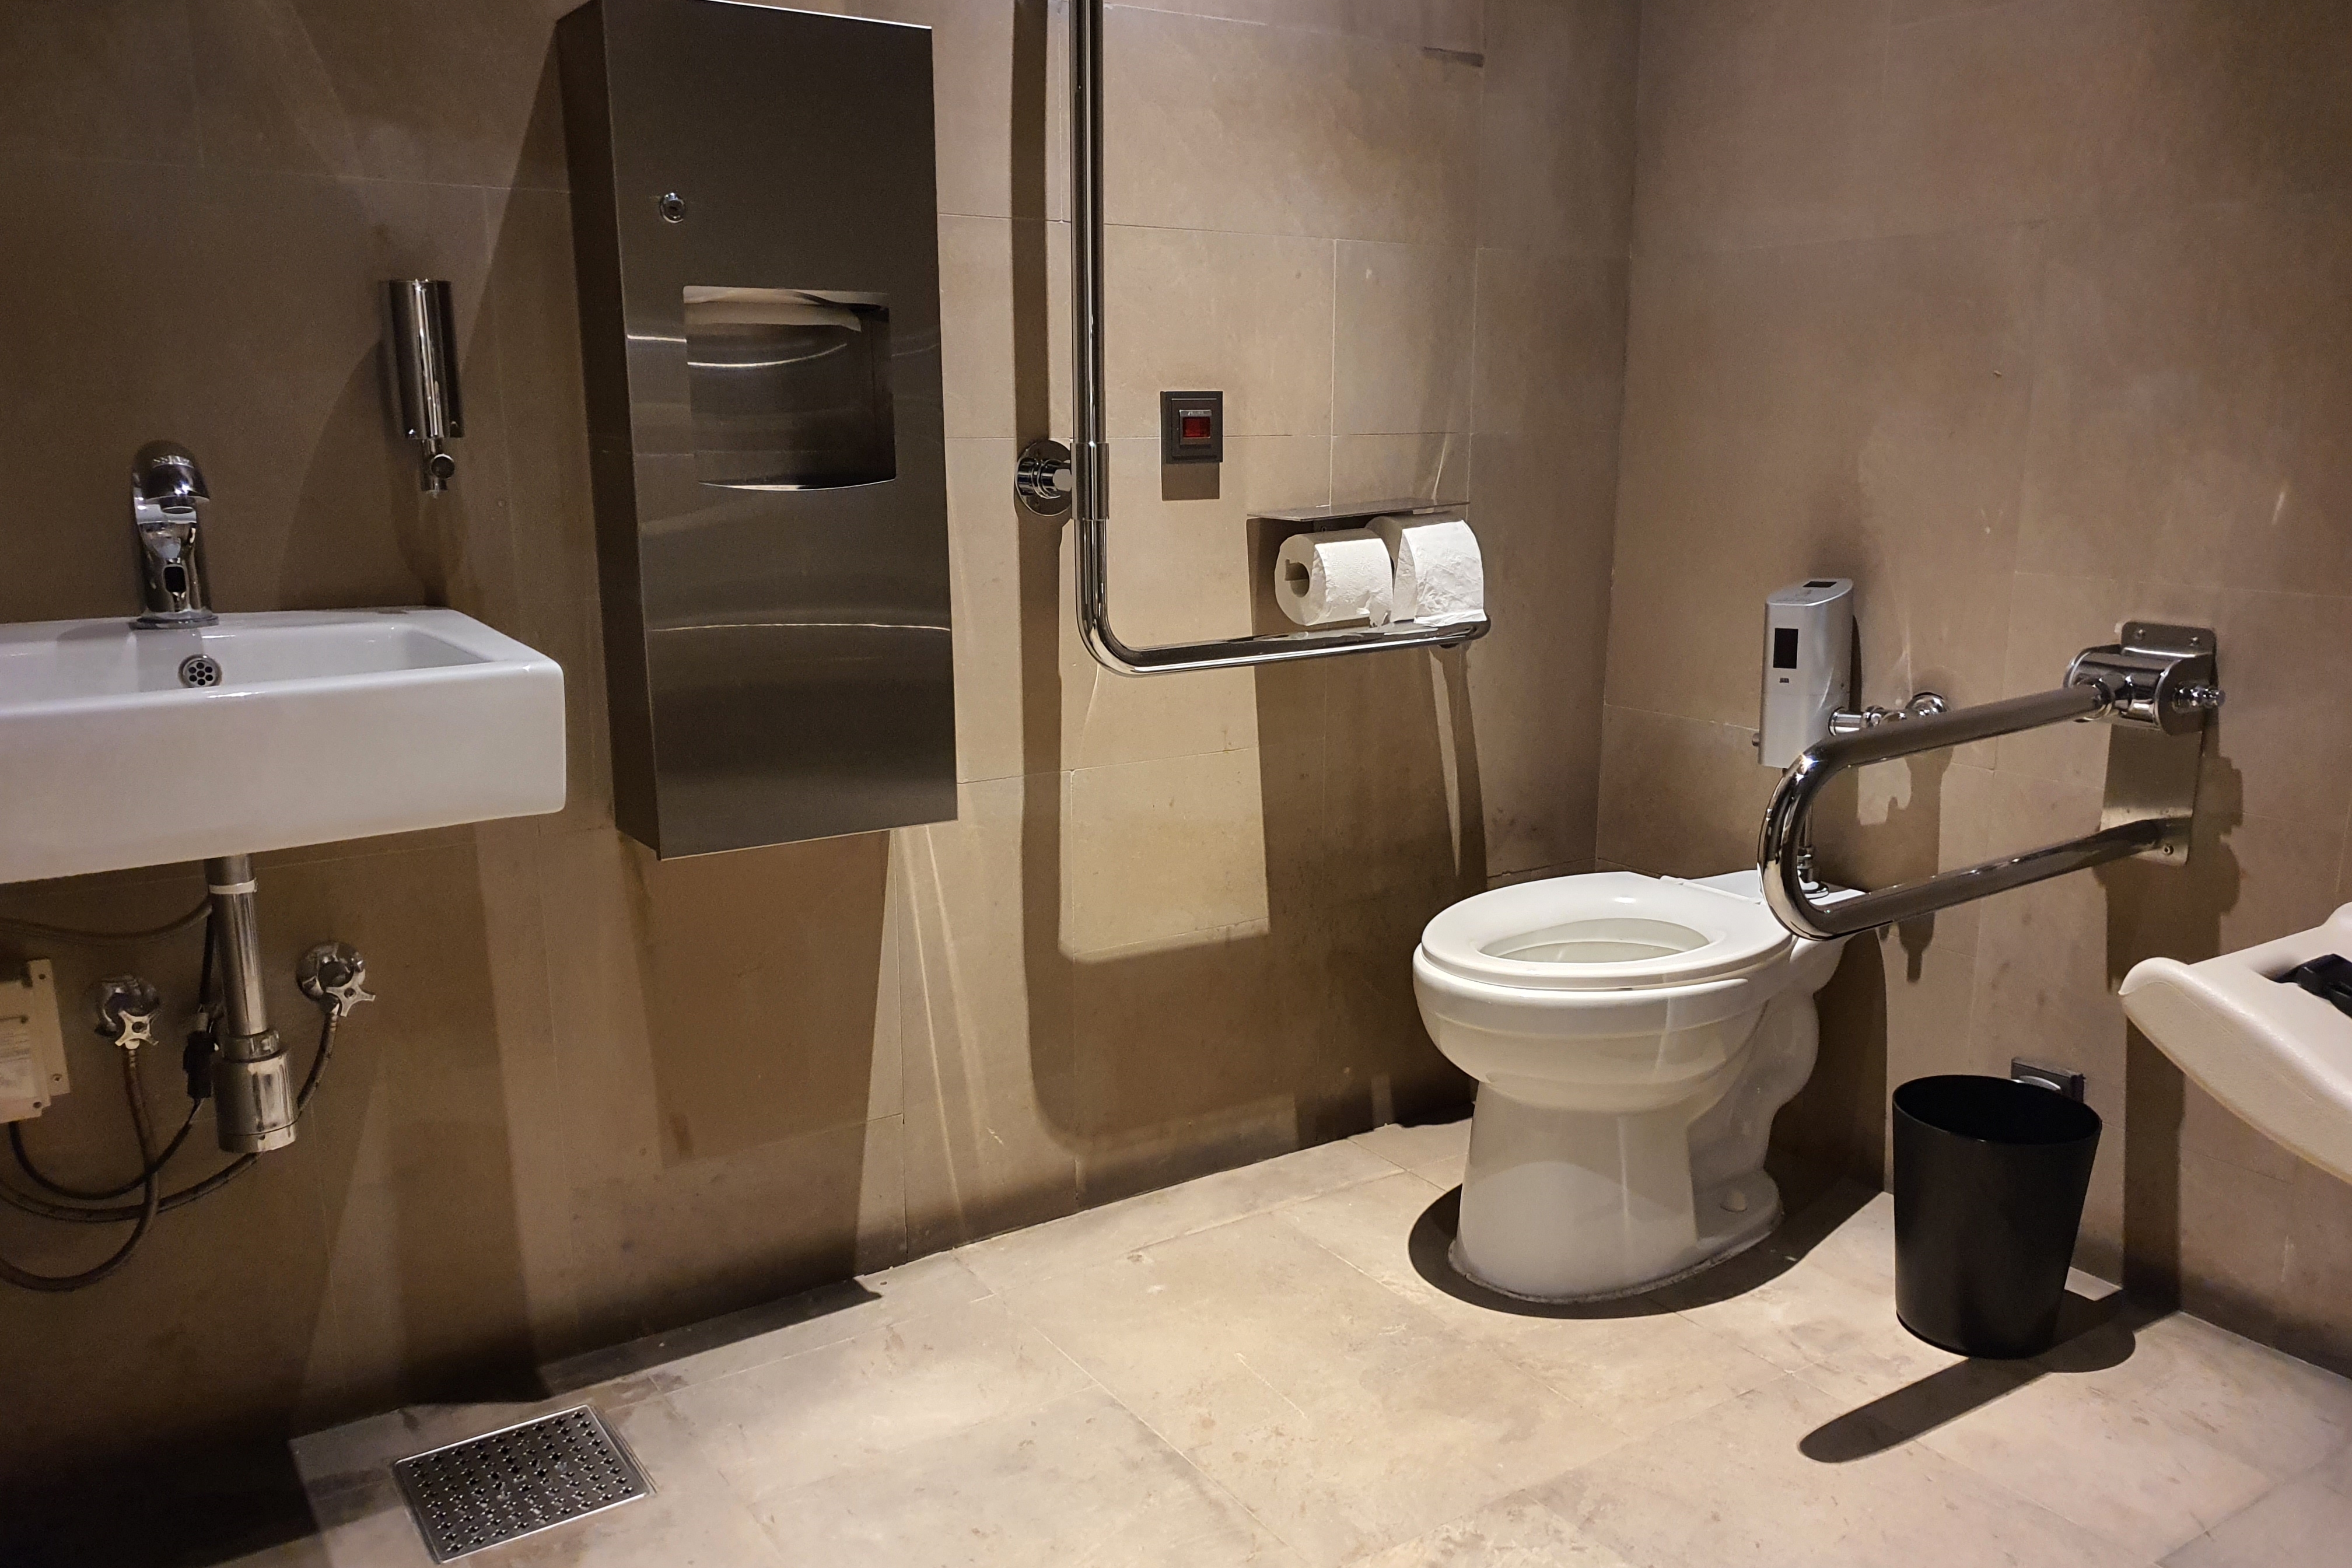 Restroom0 : An accessible restroom equipped with grab bars